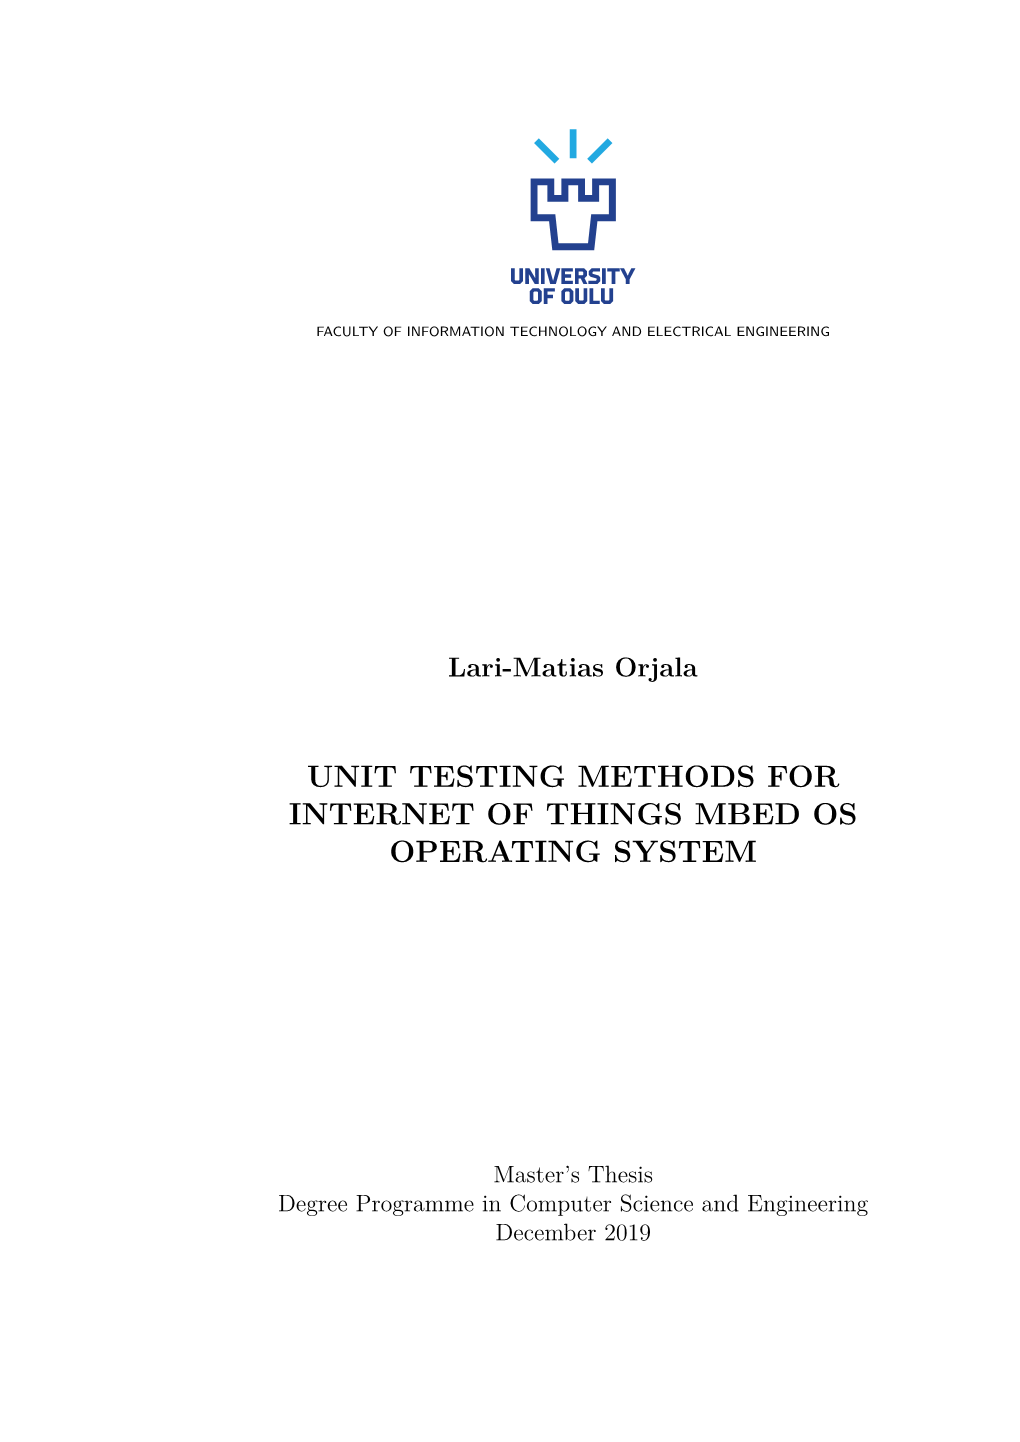 Unit Testing Methods for Internet of Things Mbed Os Operating System